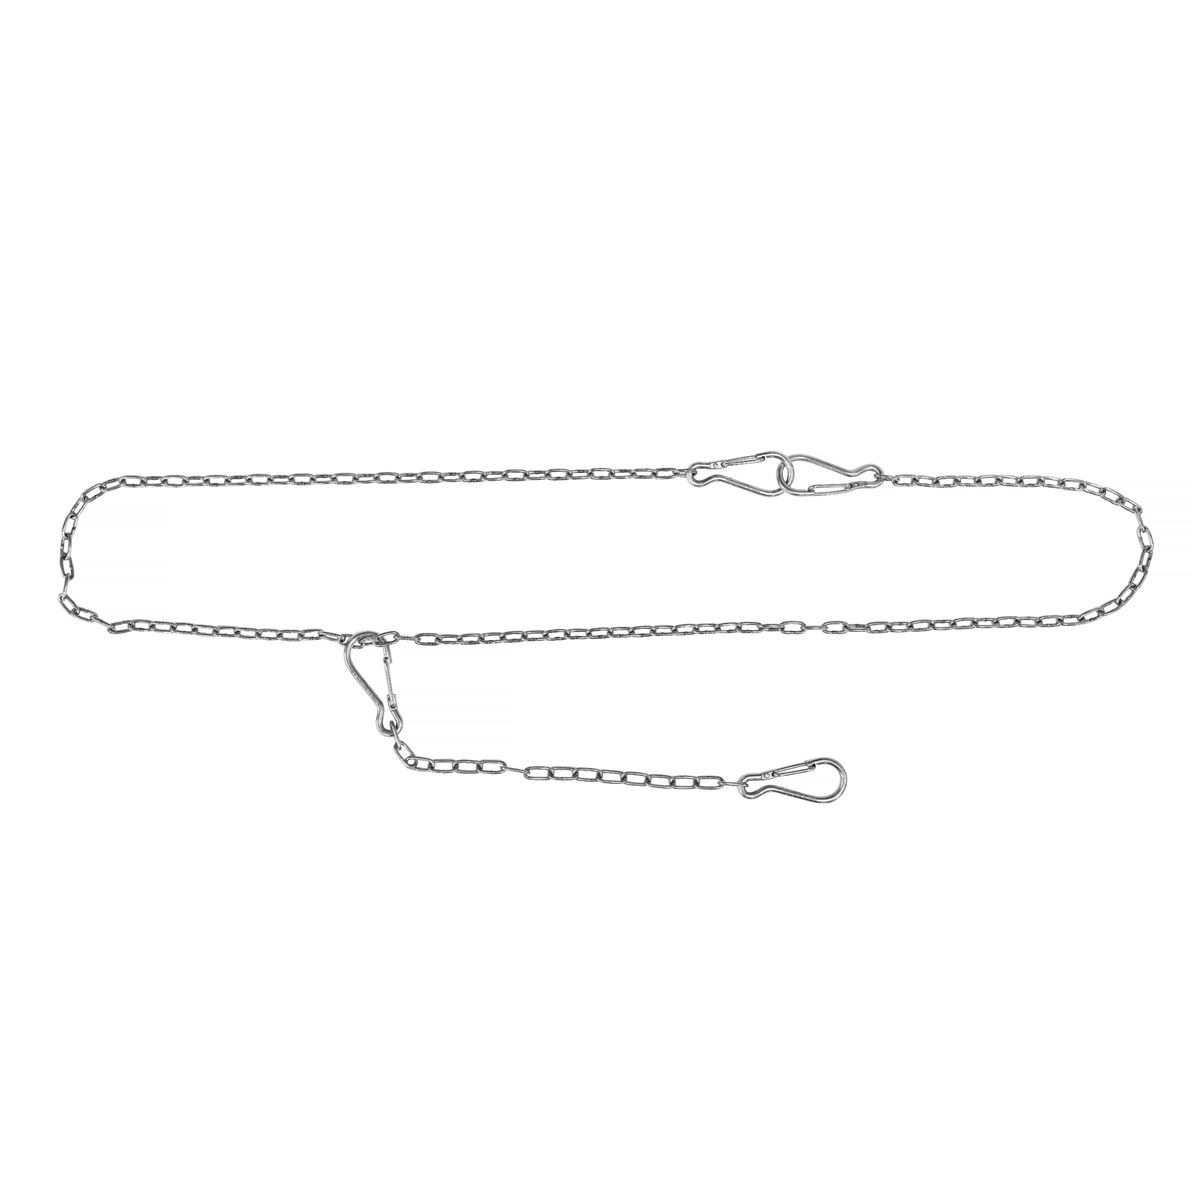 Chain Belt, Stainless Steel with Snap Hooks (+ 2 Spare Snap Hooks)